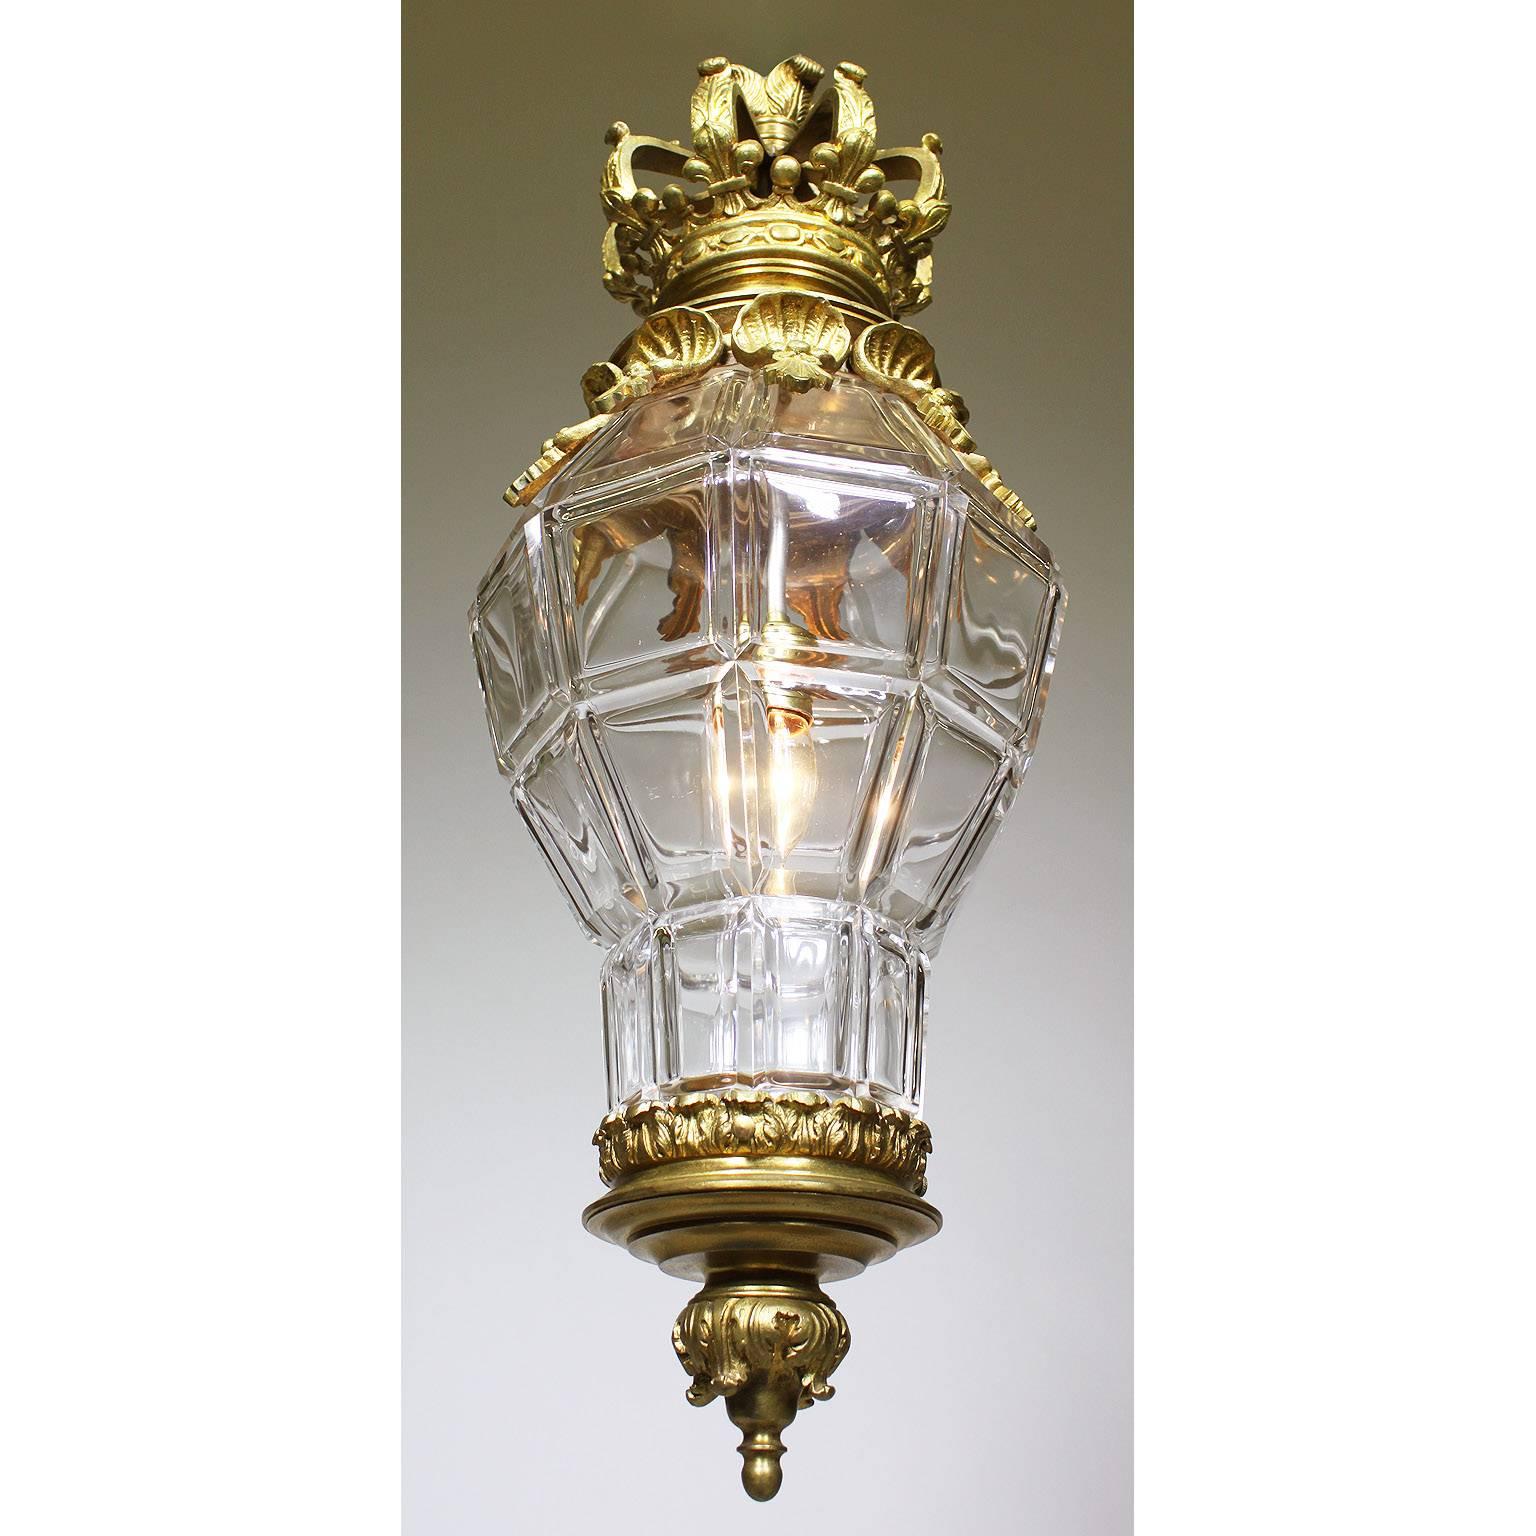 A fine French, 19th-20th century gilt bronze and molded glass 